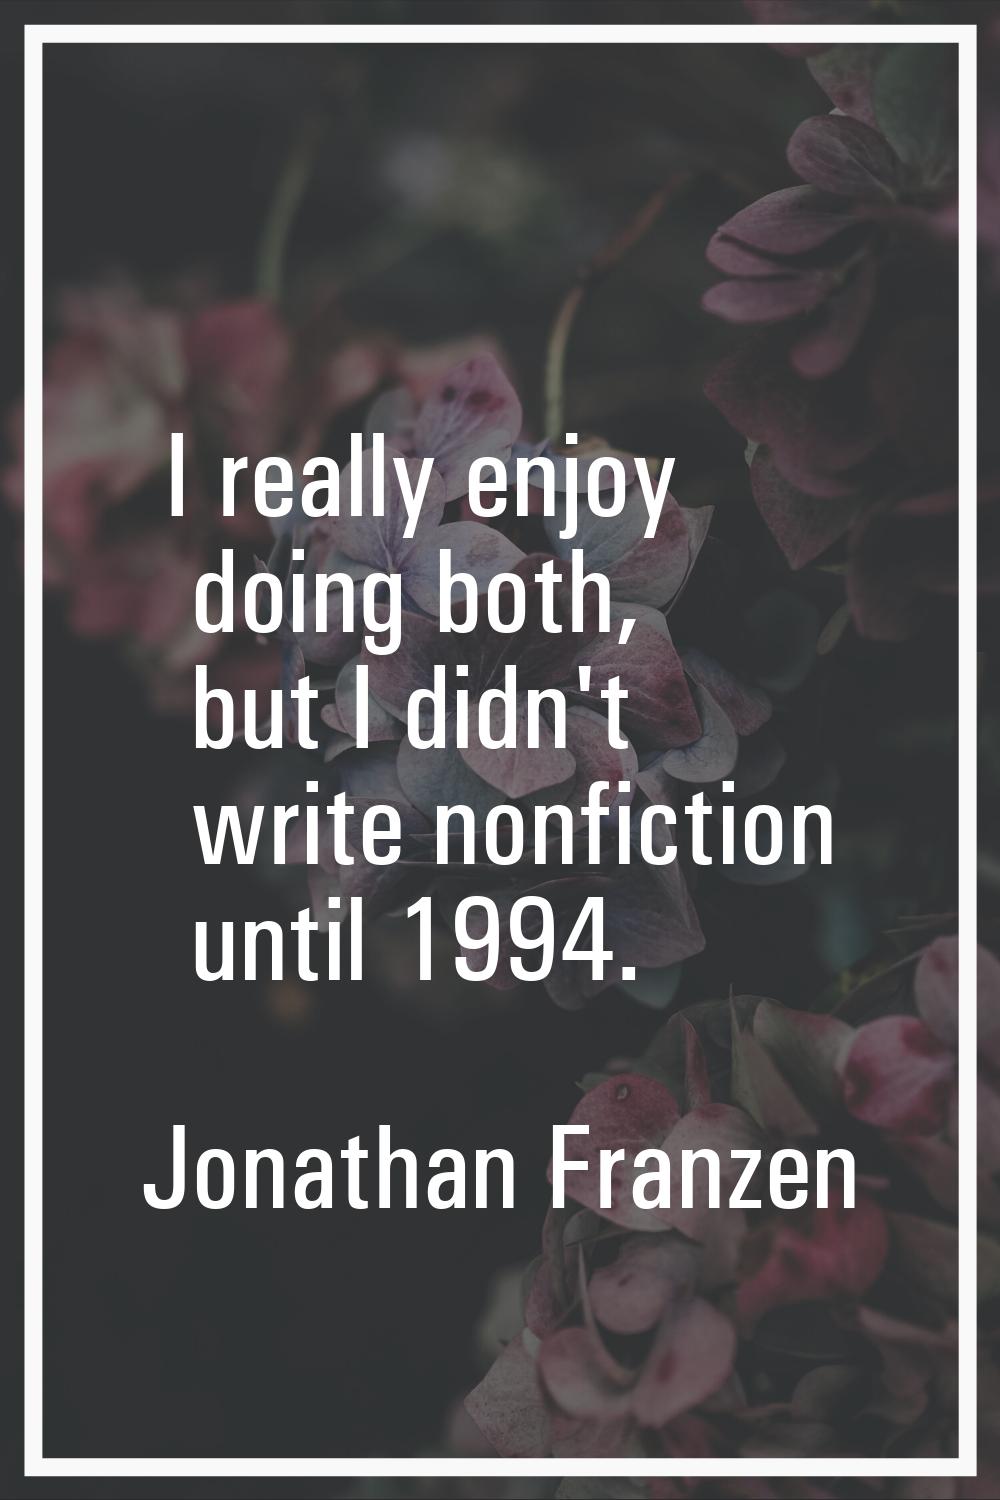 I really enjoy doing both, but I didn't write nonfiction until 1994.